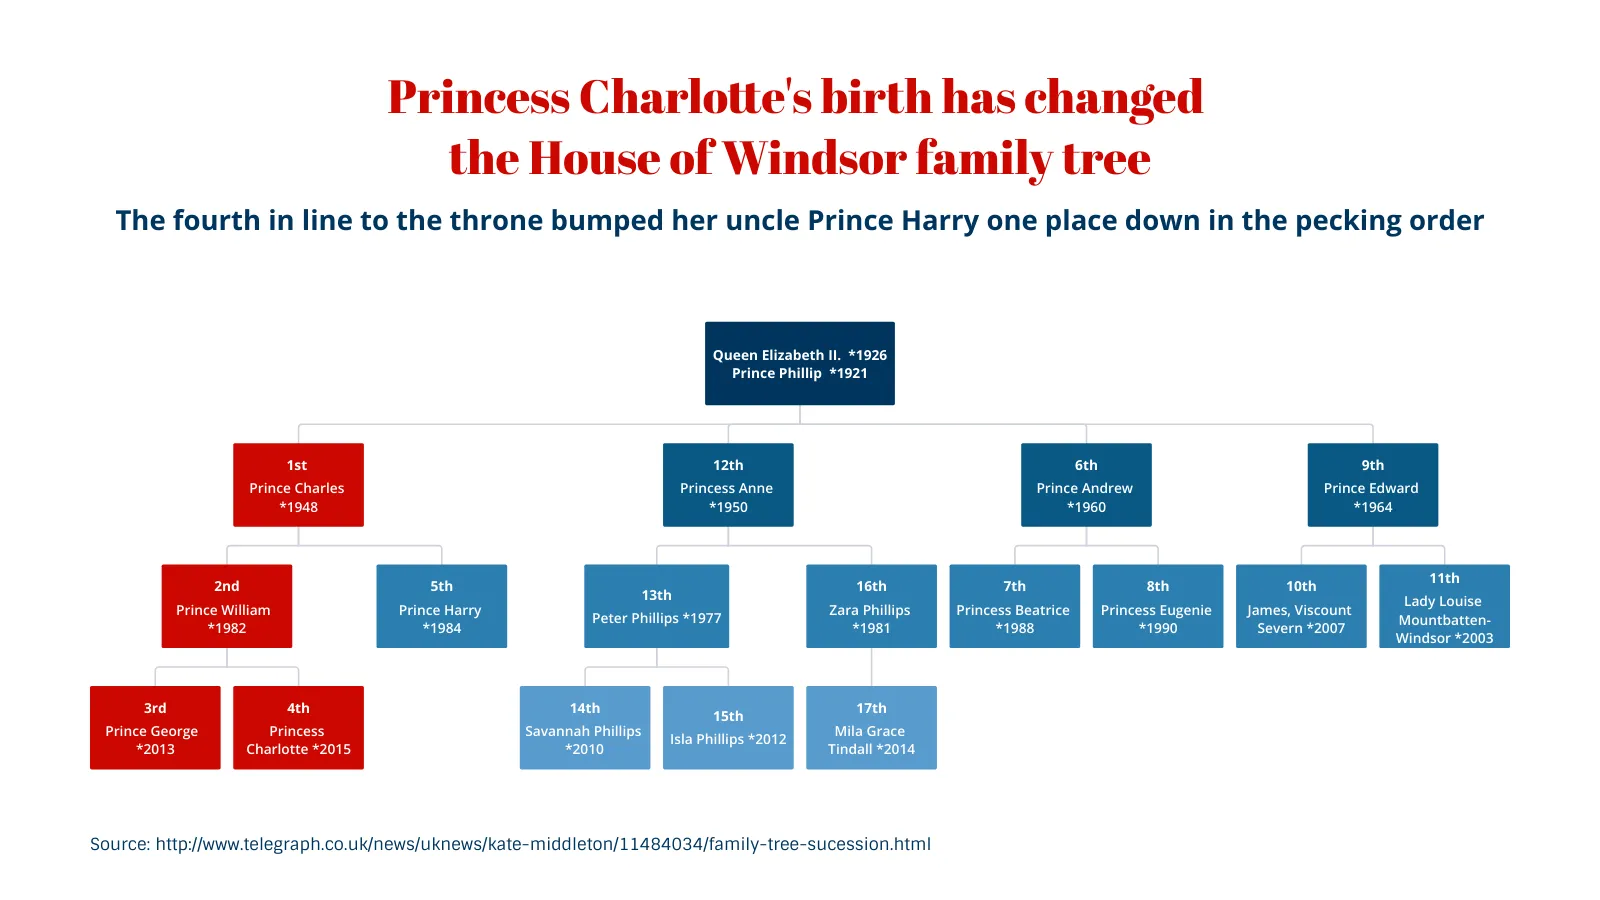 Organizational Chart example: Princess Charlotte's birth has changed 
the House of Windsor family tree